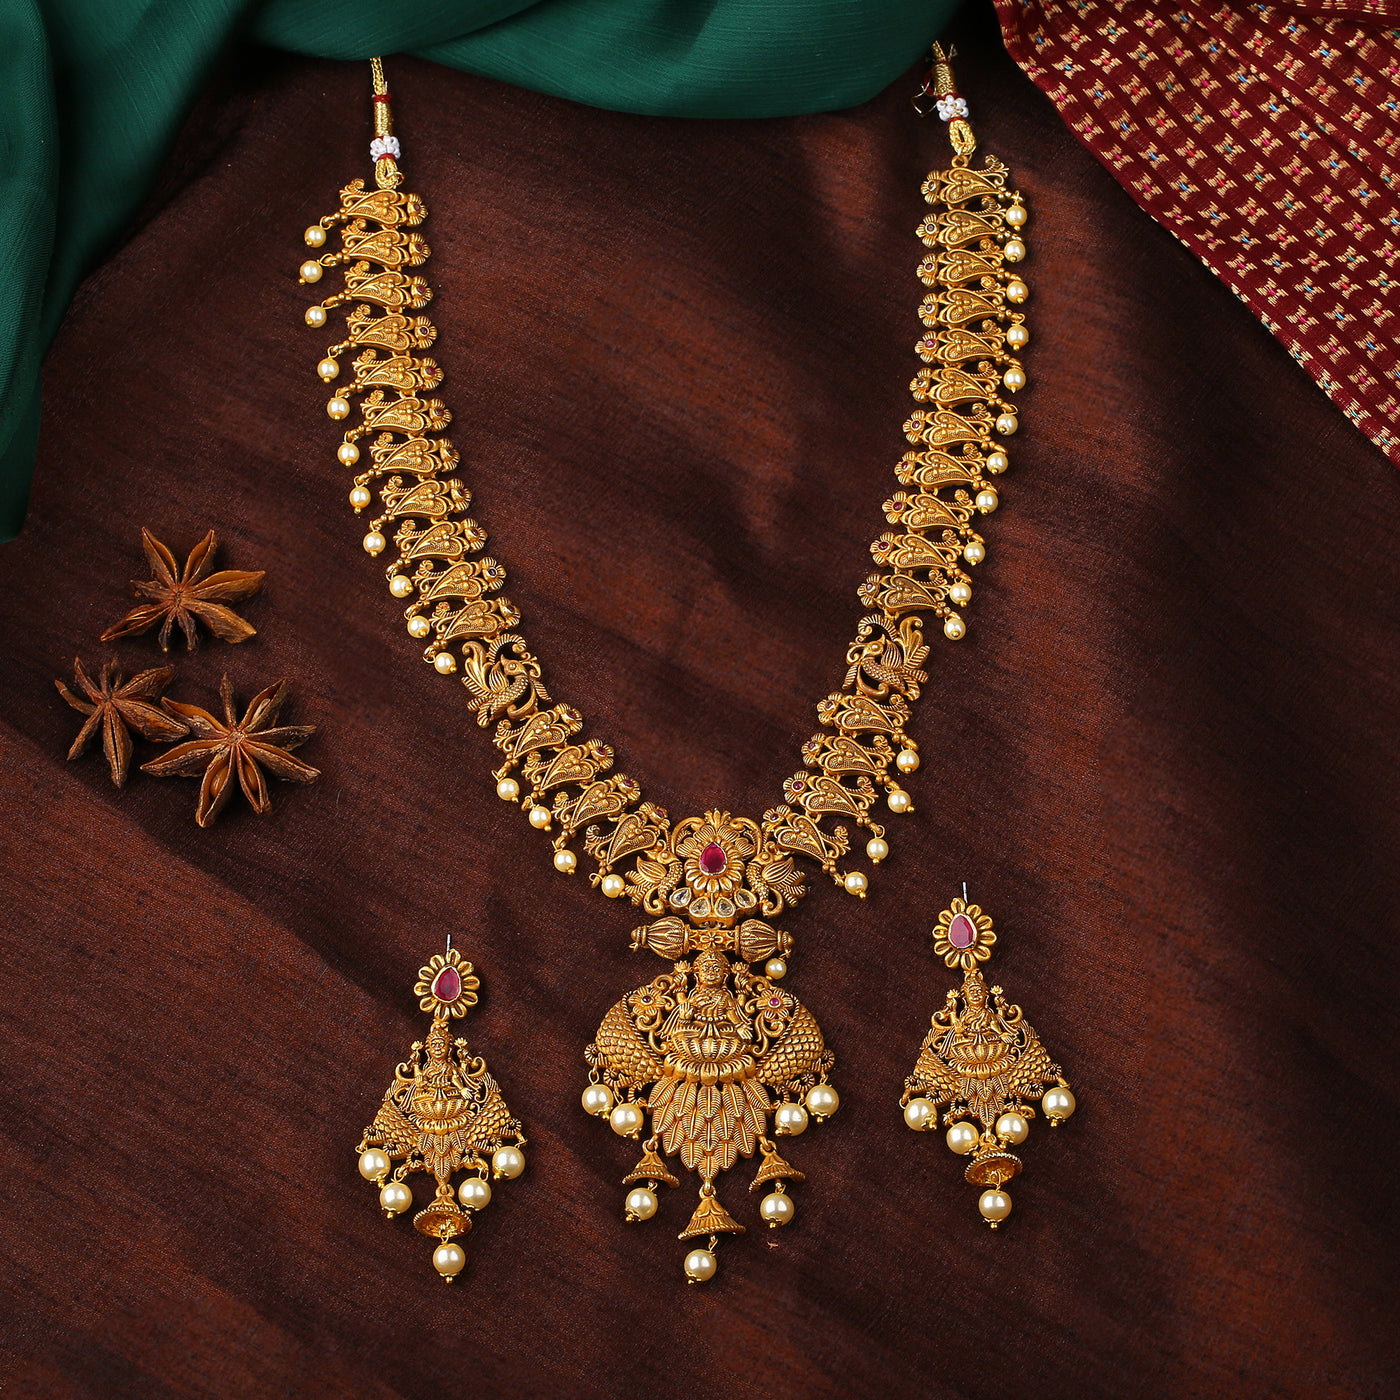 Estele Gold Plated Sacred Laxmi Ji Bridal Necklace Set Combo with Color Stones & Pearls for Women